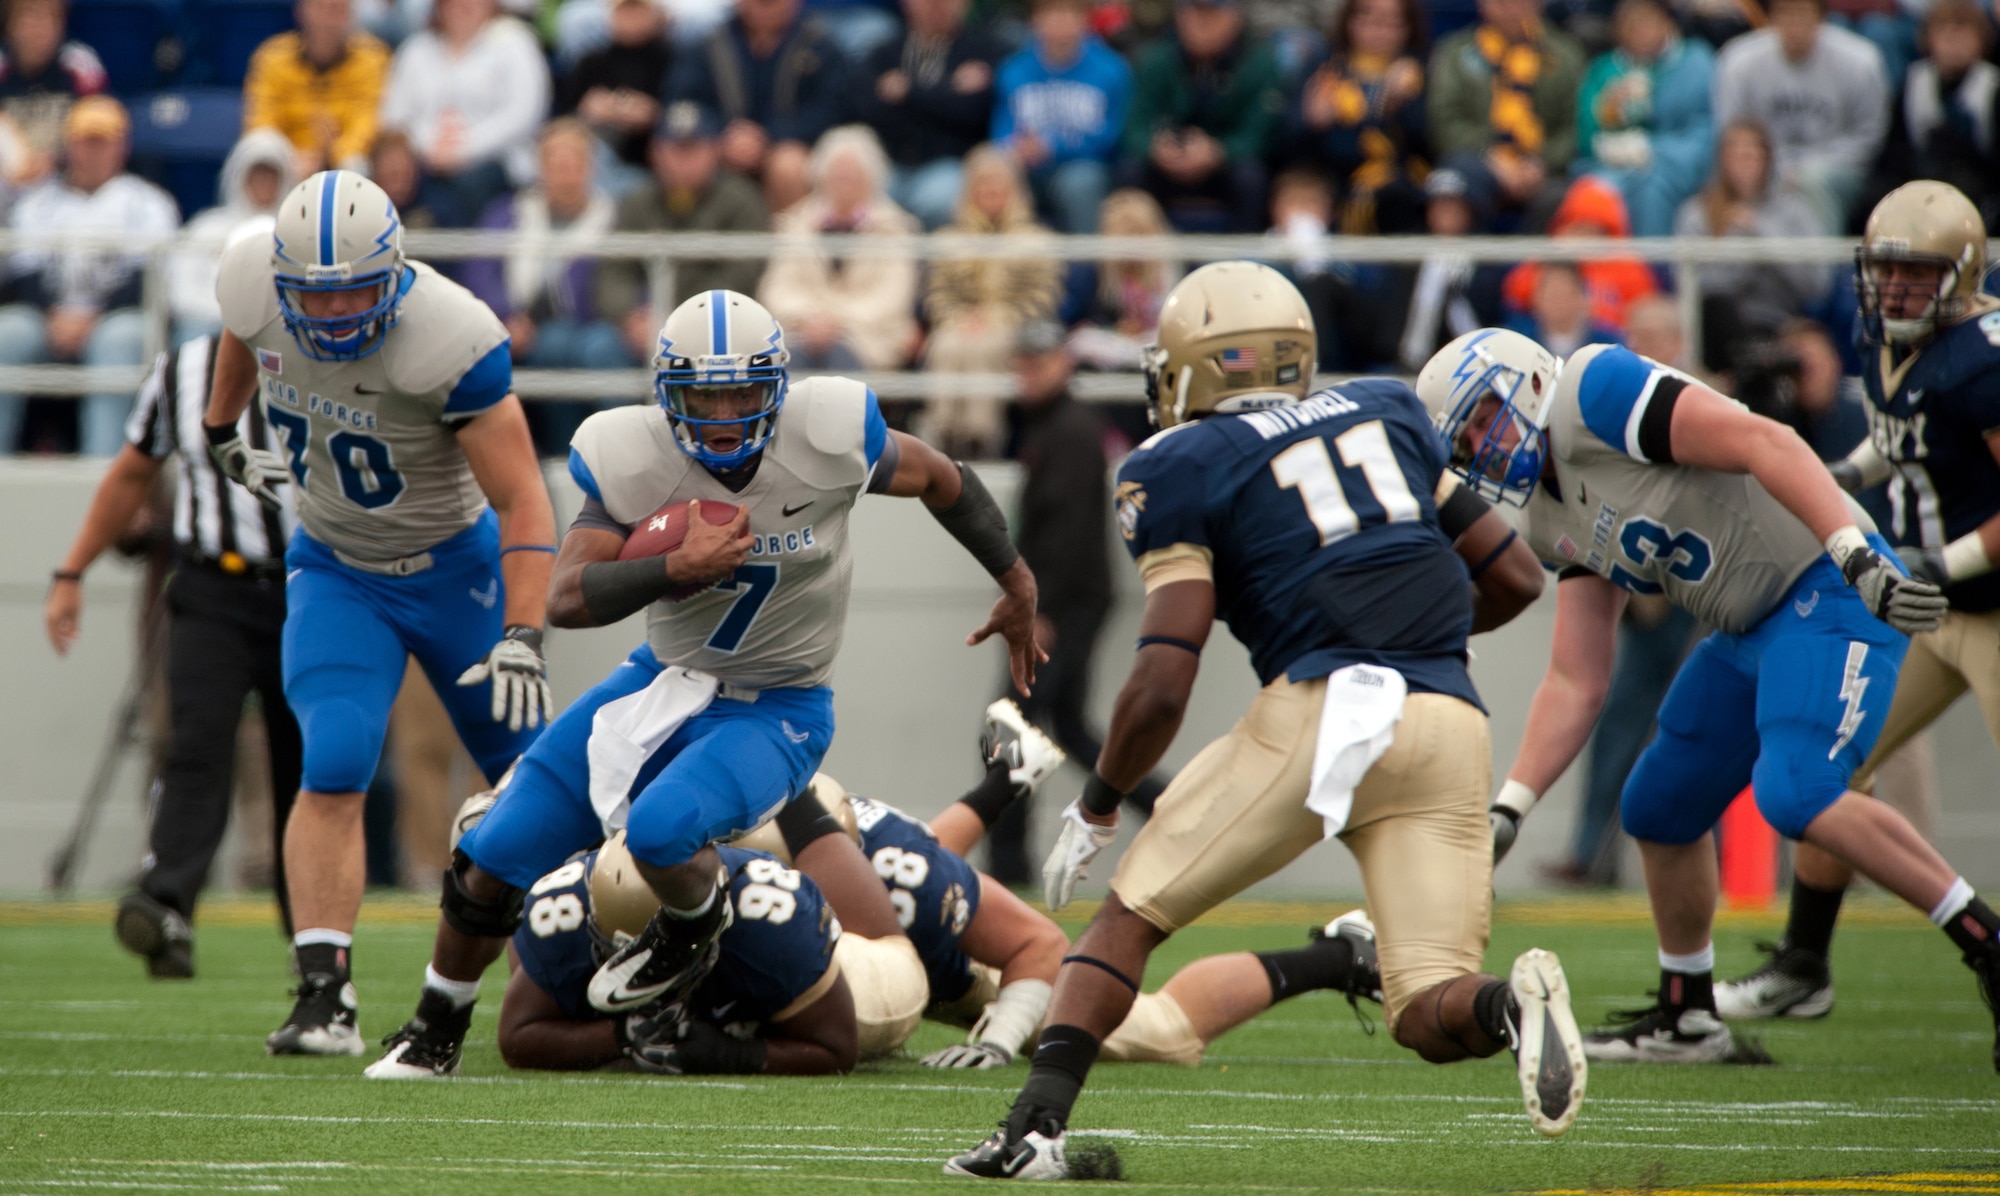 Air Force quarterback Tim Jefferson runs up the middle as the Falcons take on the Midshipmen of Navy Saturday, Oct. 1, 2011 at the Naval Academy's Jack Stephens Field. The Falcons dominated the first half, but almost let go of the game in the second after the Mids outscored them 25-7. The Falcons won 35-34 in overtime after the Mids kicker Jon Teague missed their point after attempt.  (U.S. Air Force photo/Russ Scalf)